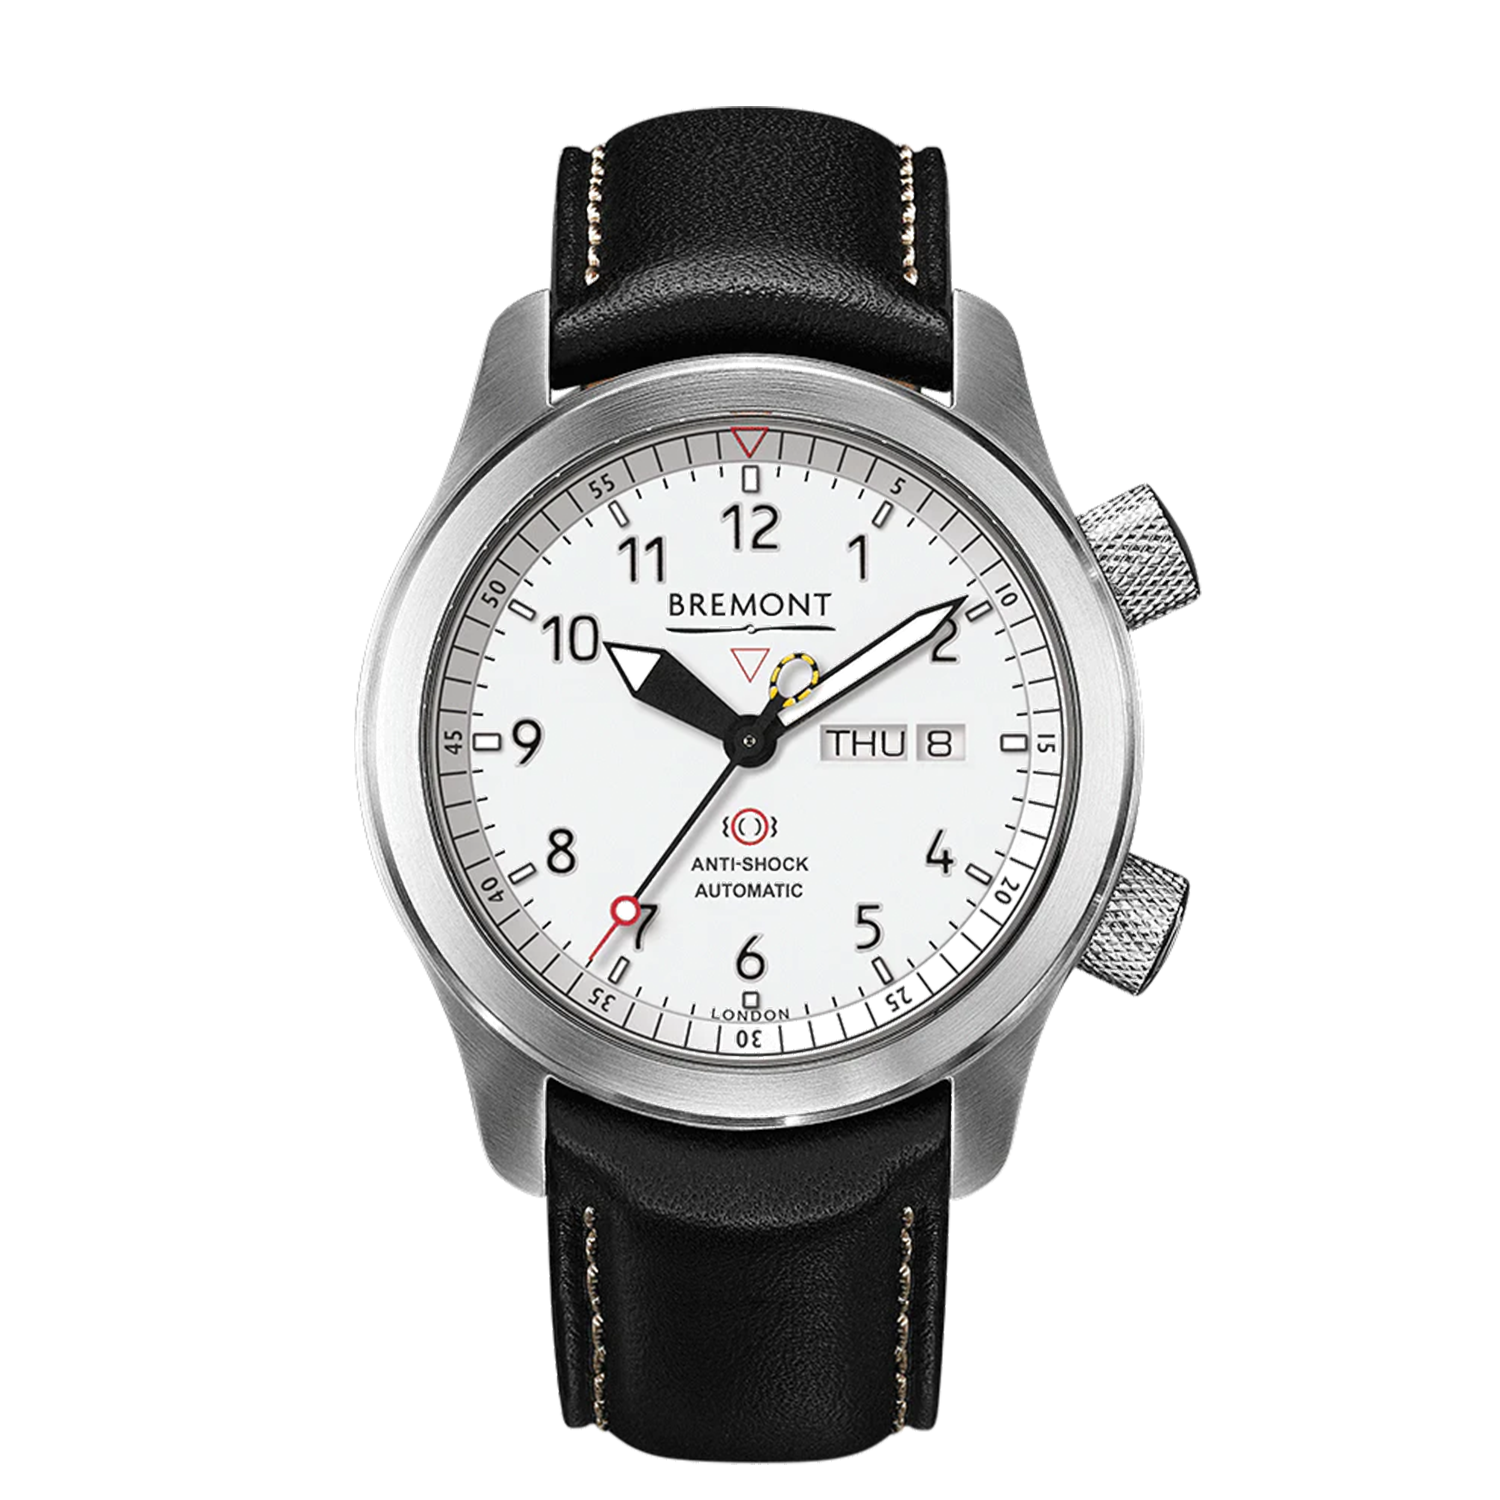 Bremont Chronometers Watches | Mens | MB | ARCHIVE MBII White